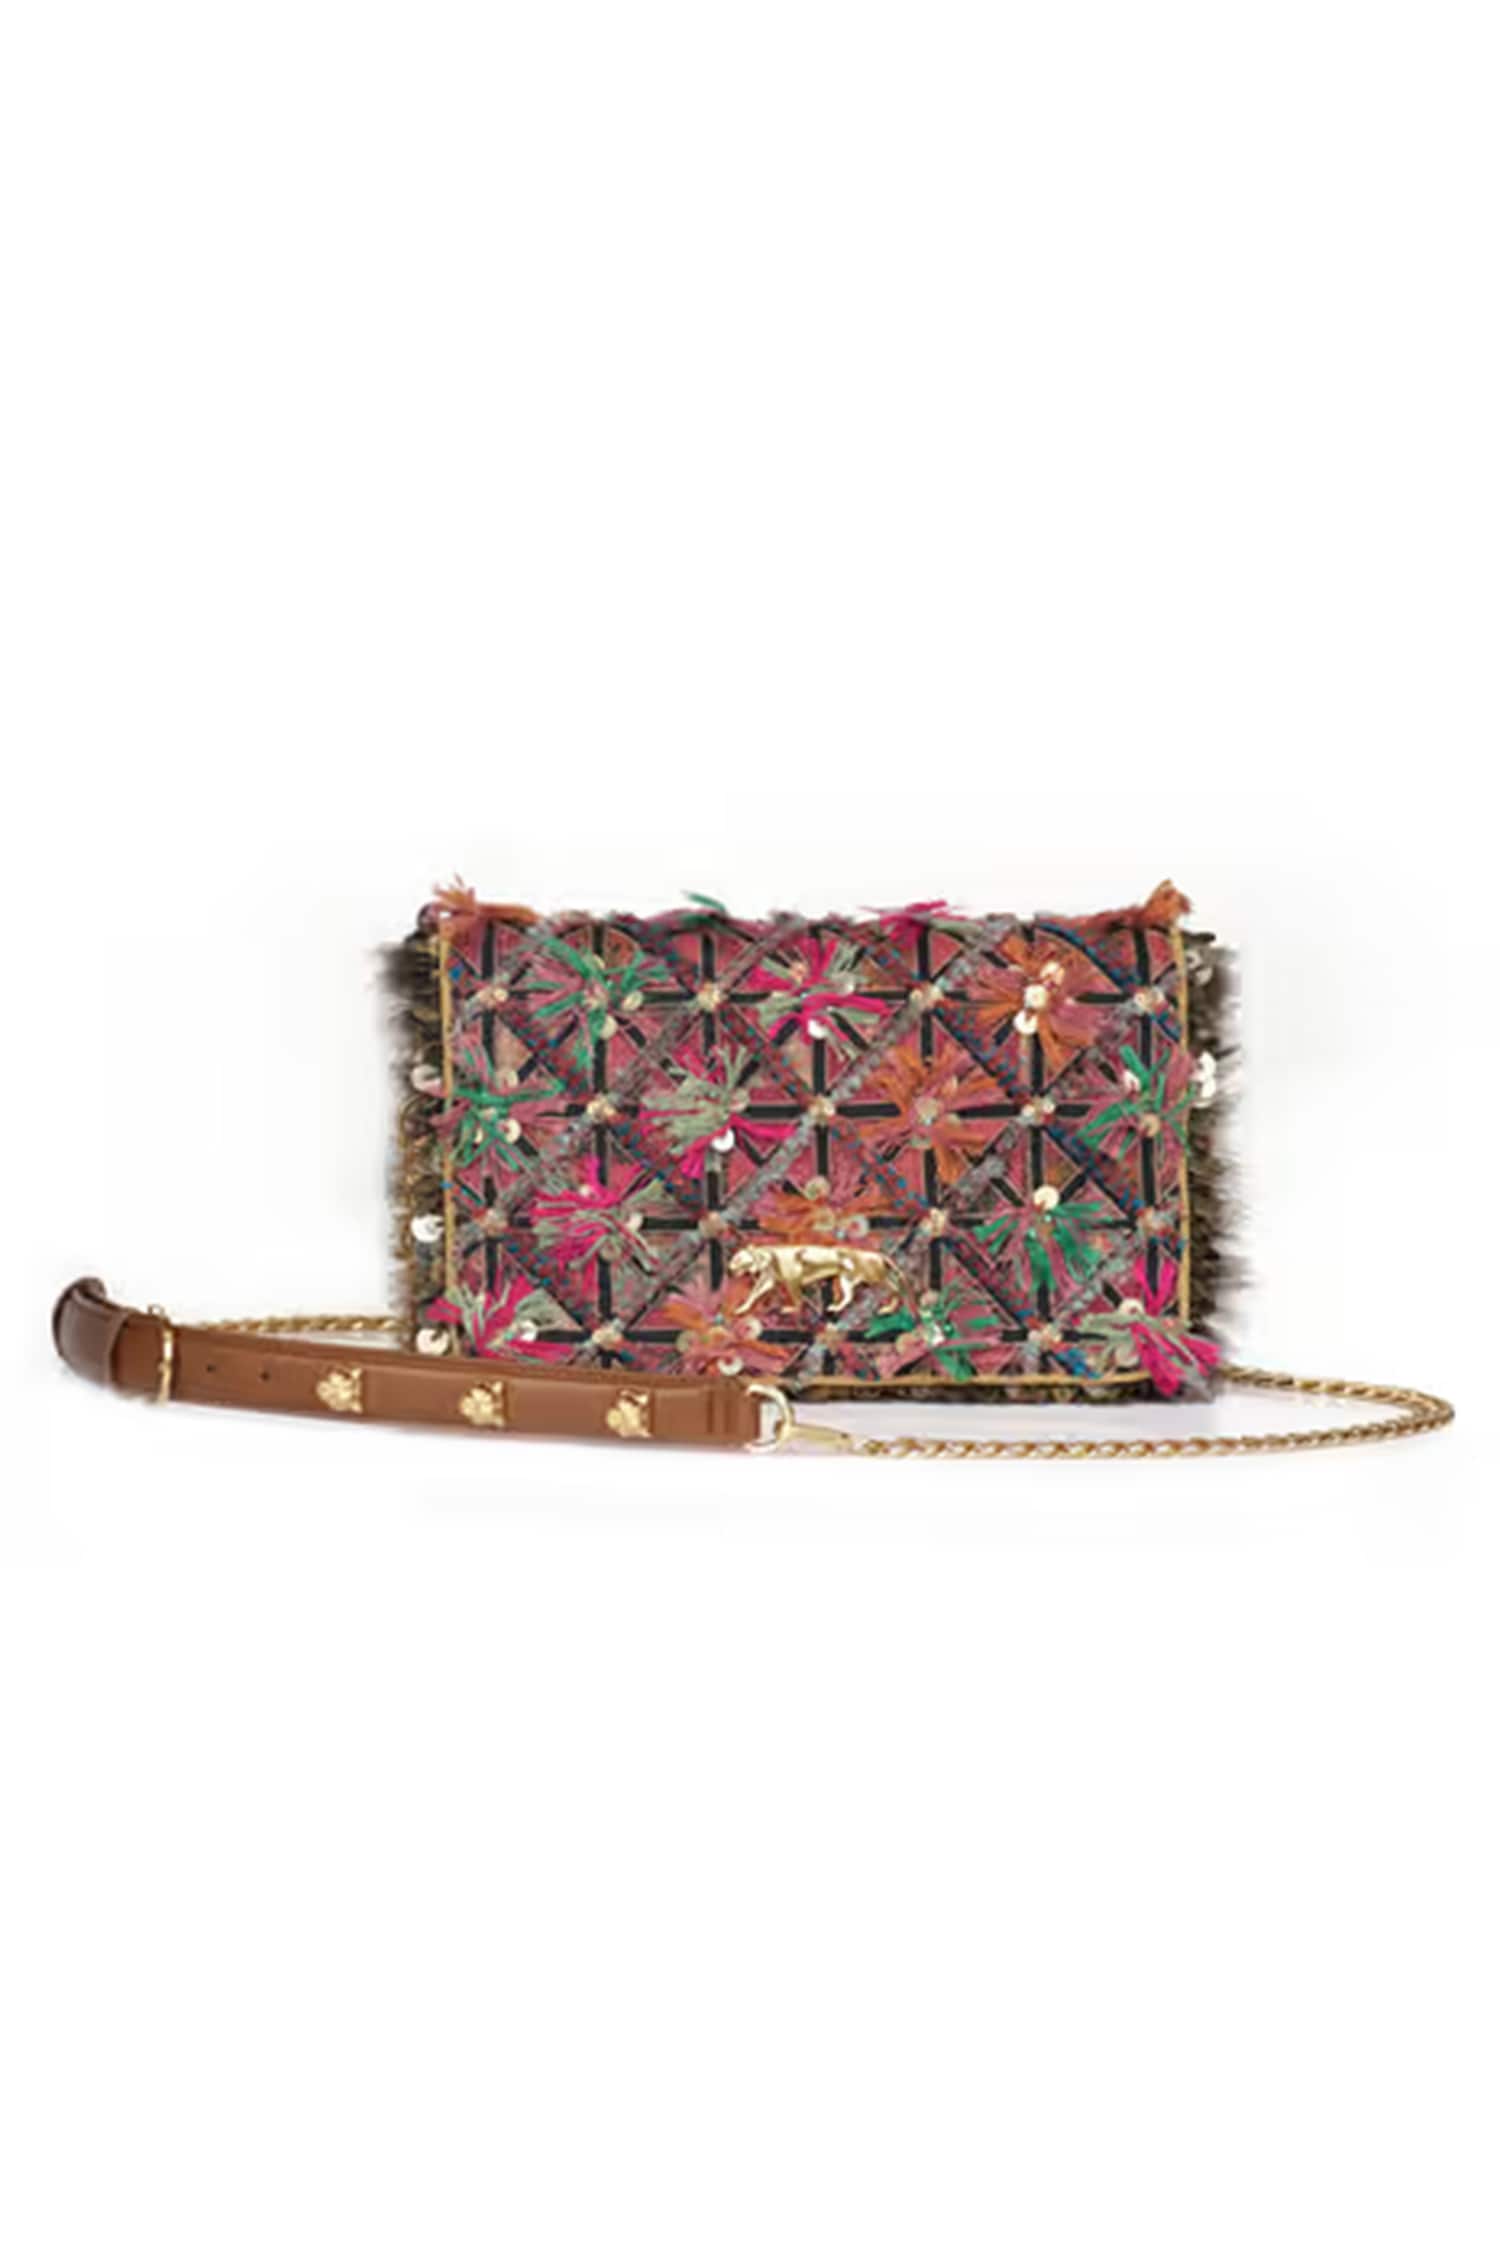 Sabyasachi - The Tropical Sling Bag by @sabyasachiaccessories